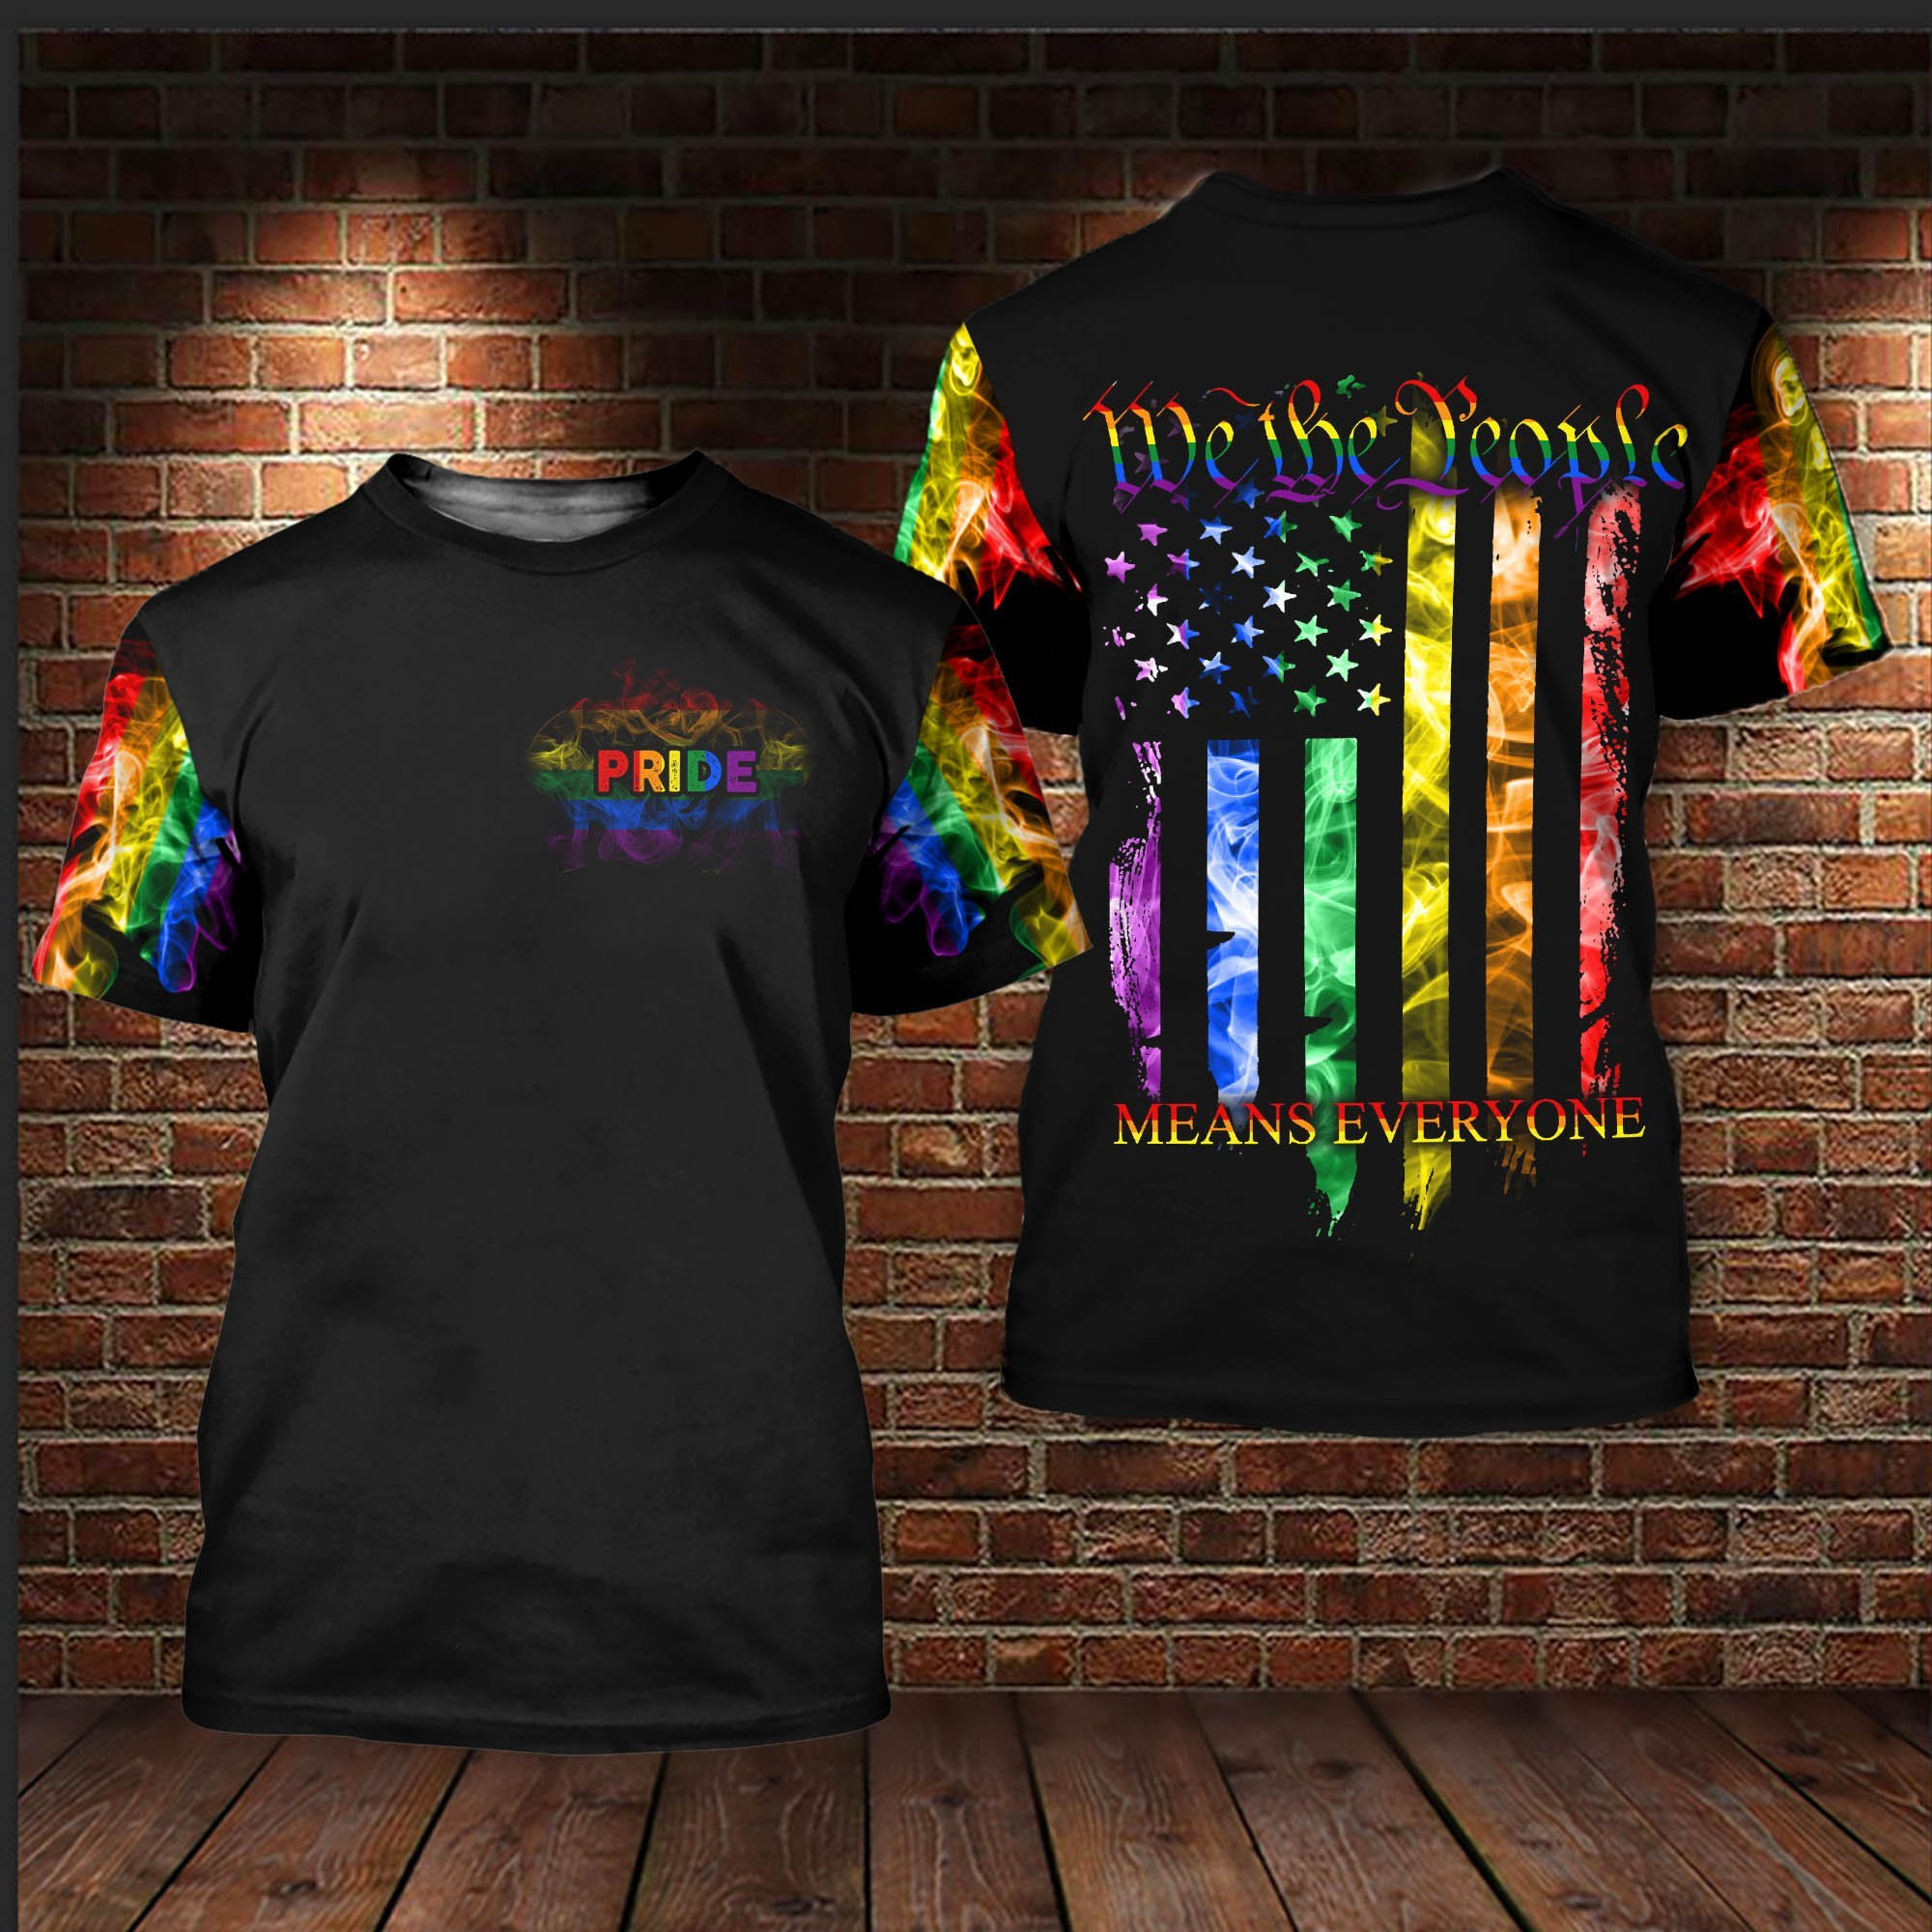 Pride Shirt For LGBT Community/ LGBT We The People Means Every One 3D All Over Printed